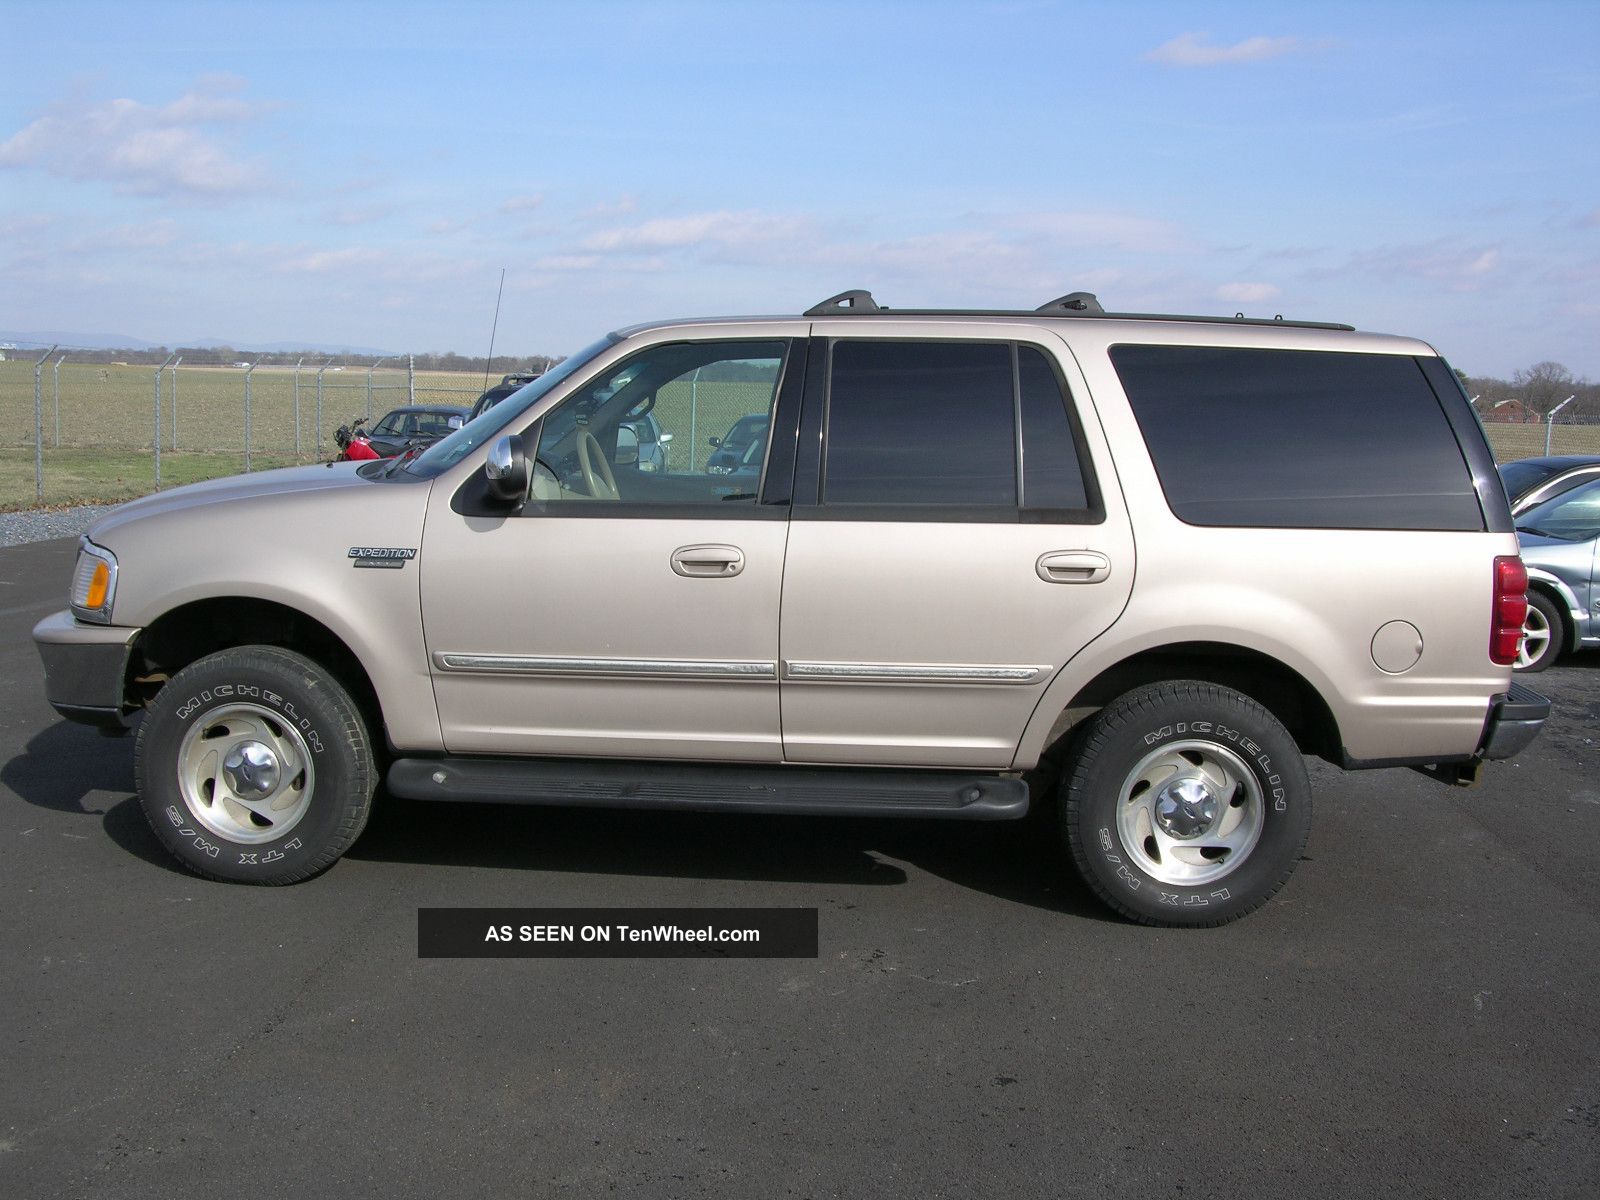 1998 Ford expedition eddie bauer owners manual pdf